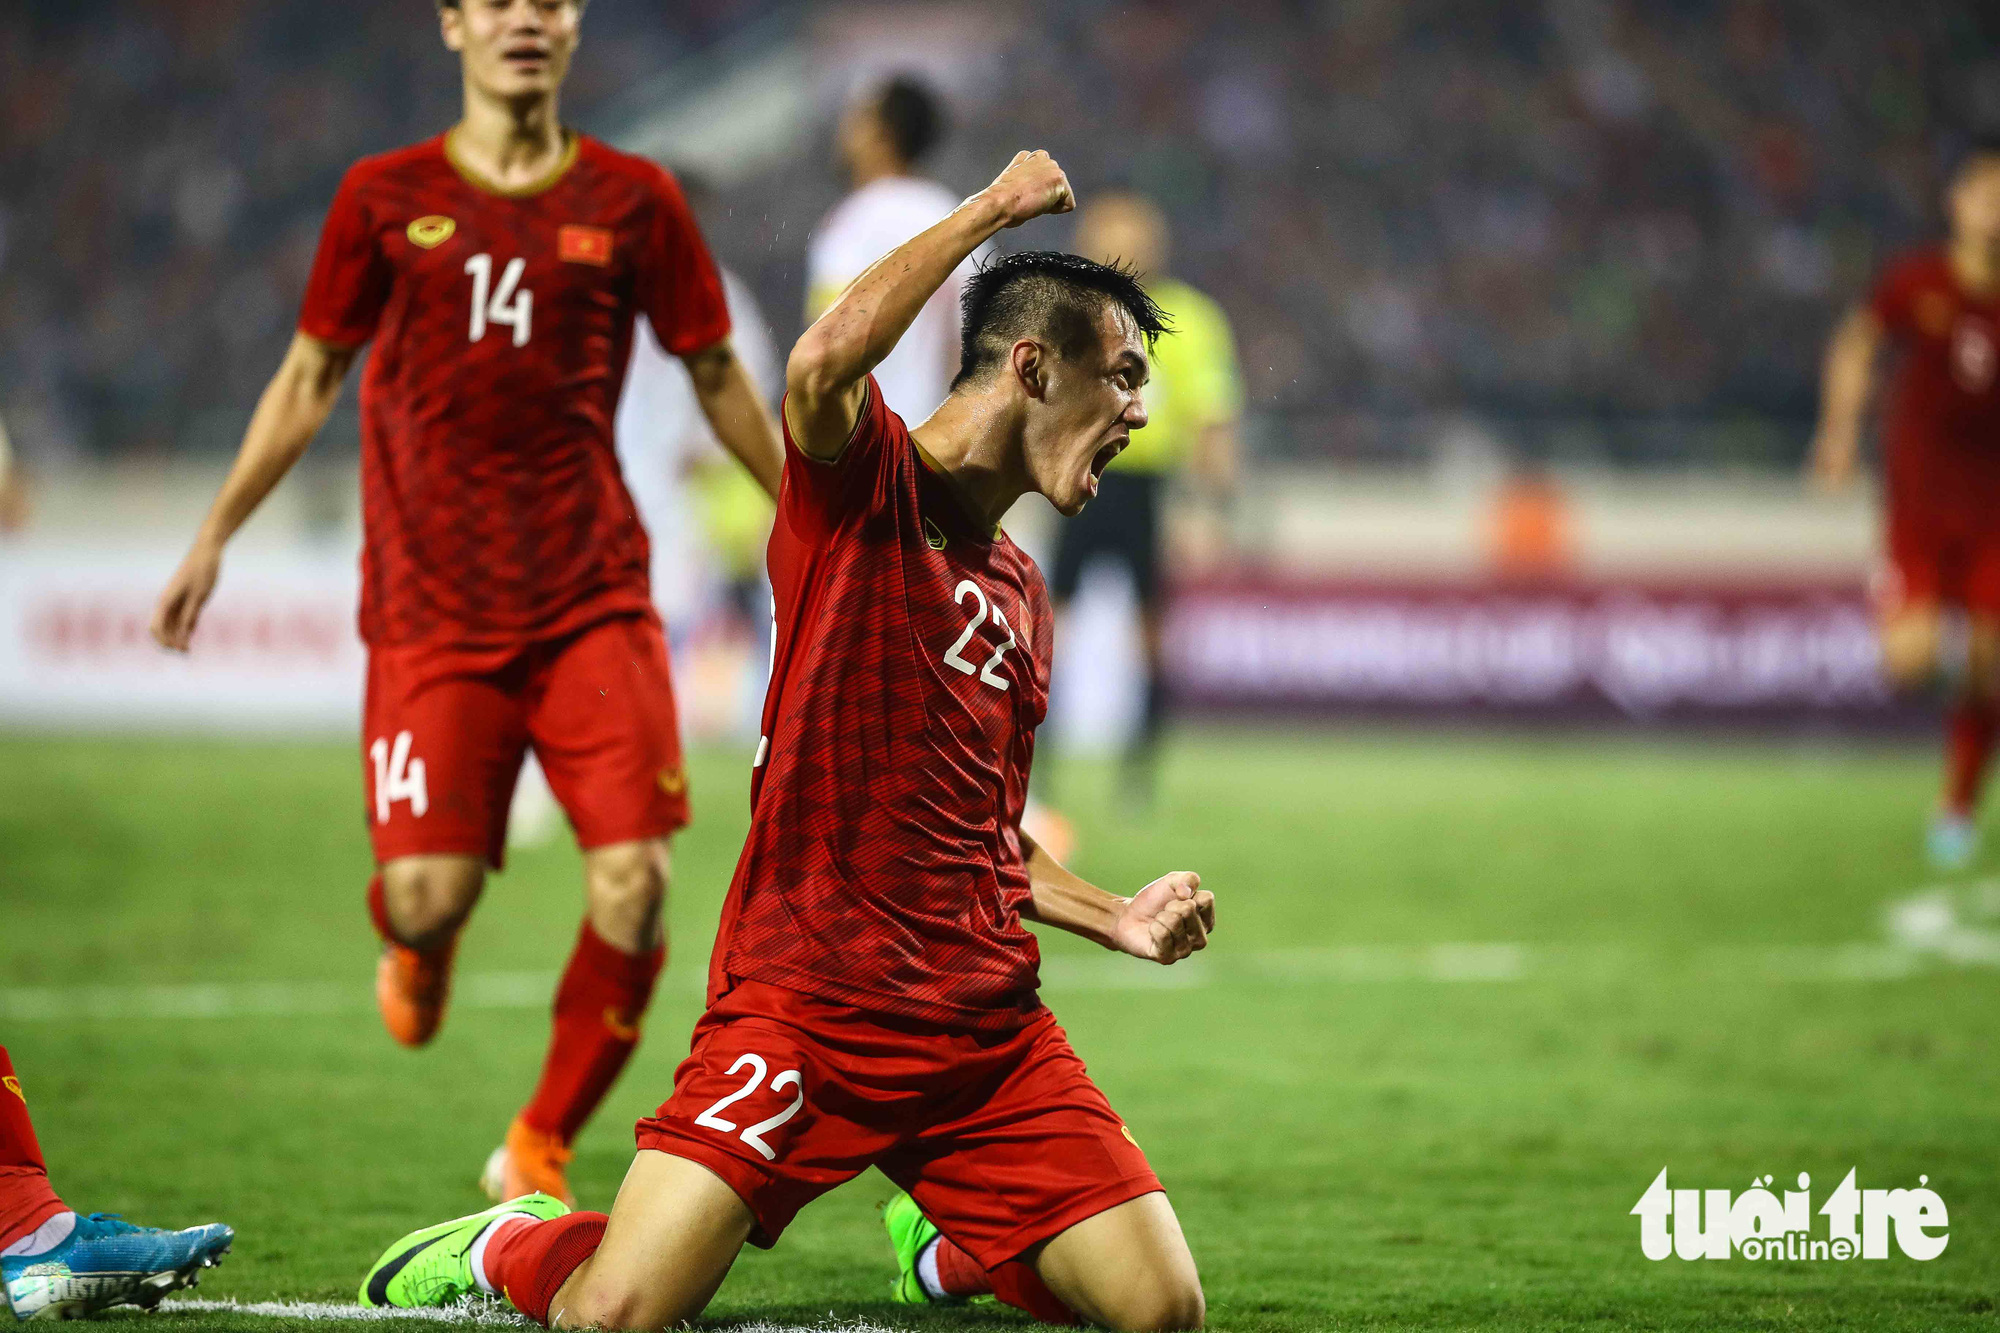 Value of Vietnam's football squad surges to $4mn amid COVID-19:  Transfermarkt